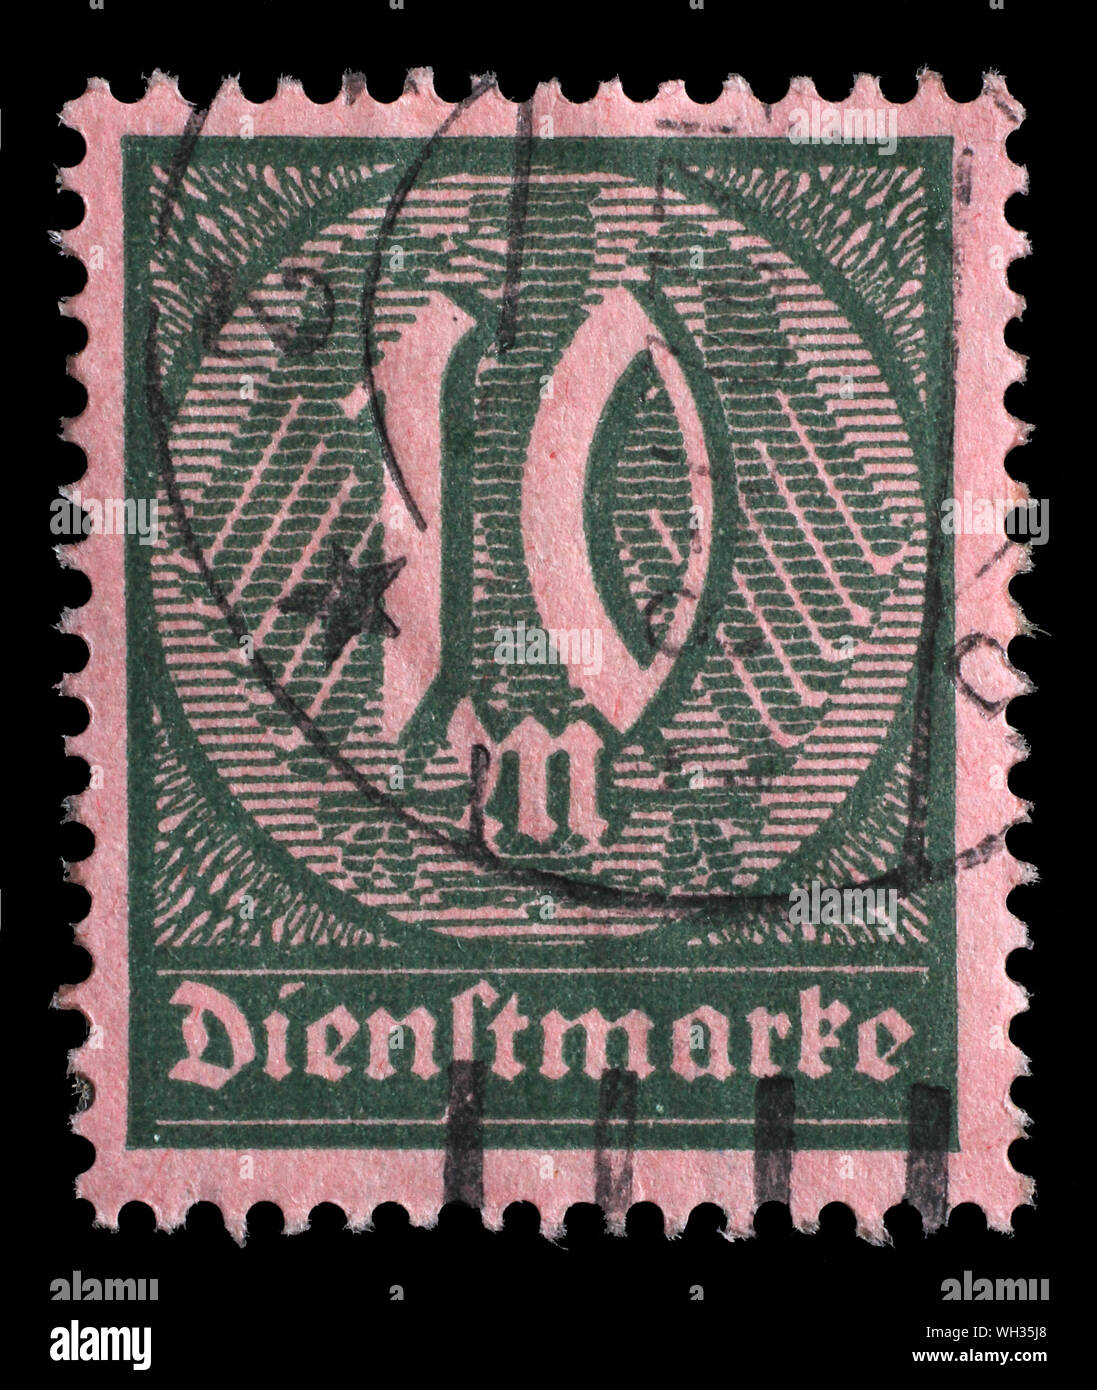 Stamp issued in German Realm shows shows numeric value, circa 1920. Stock Photo